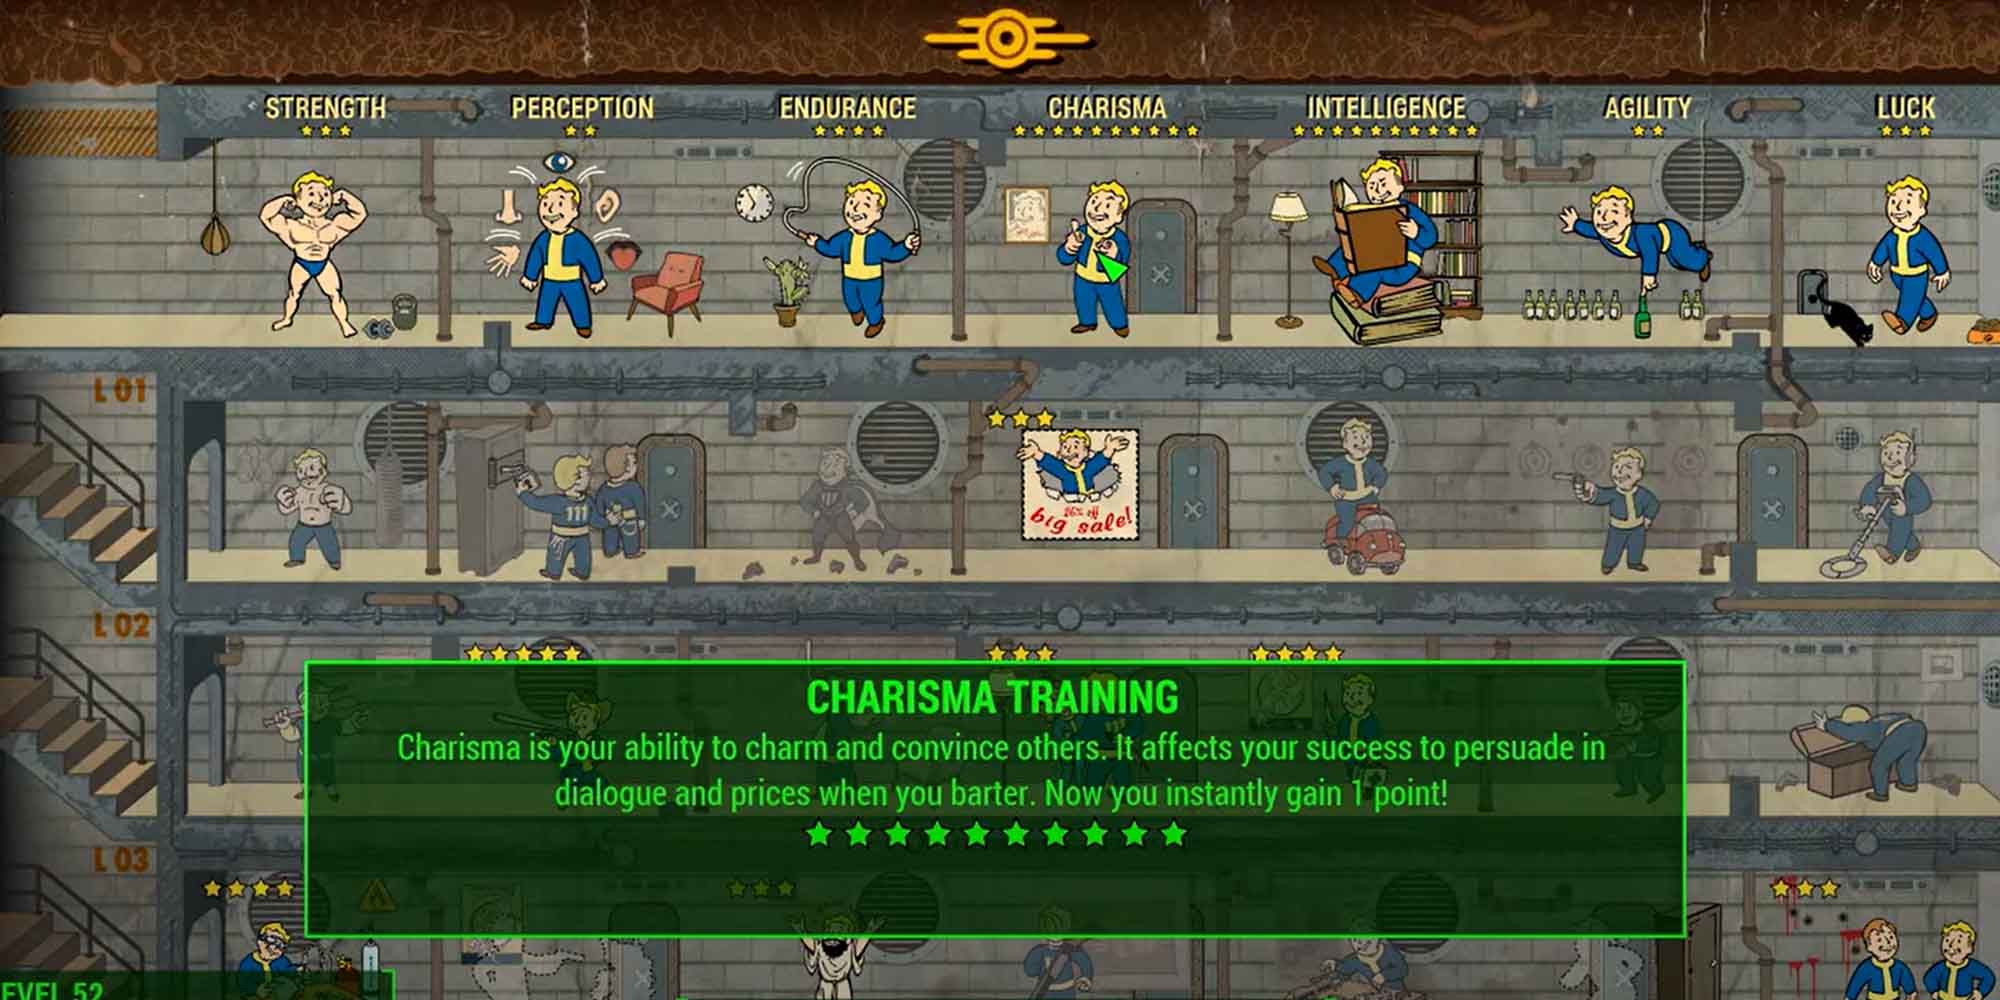 The perk selection screen in Fallout 4